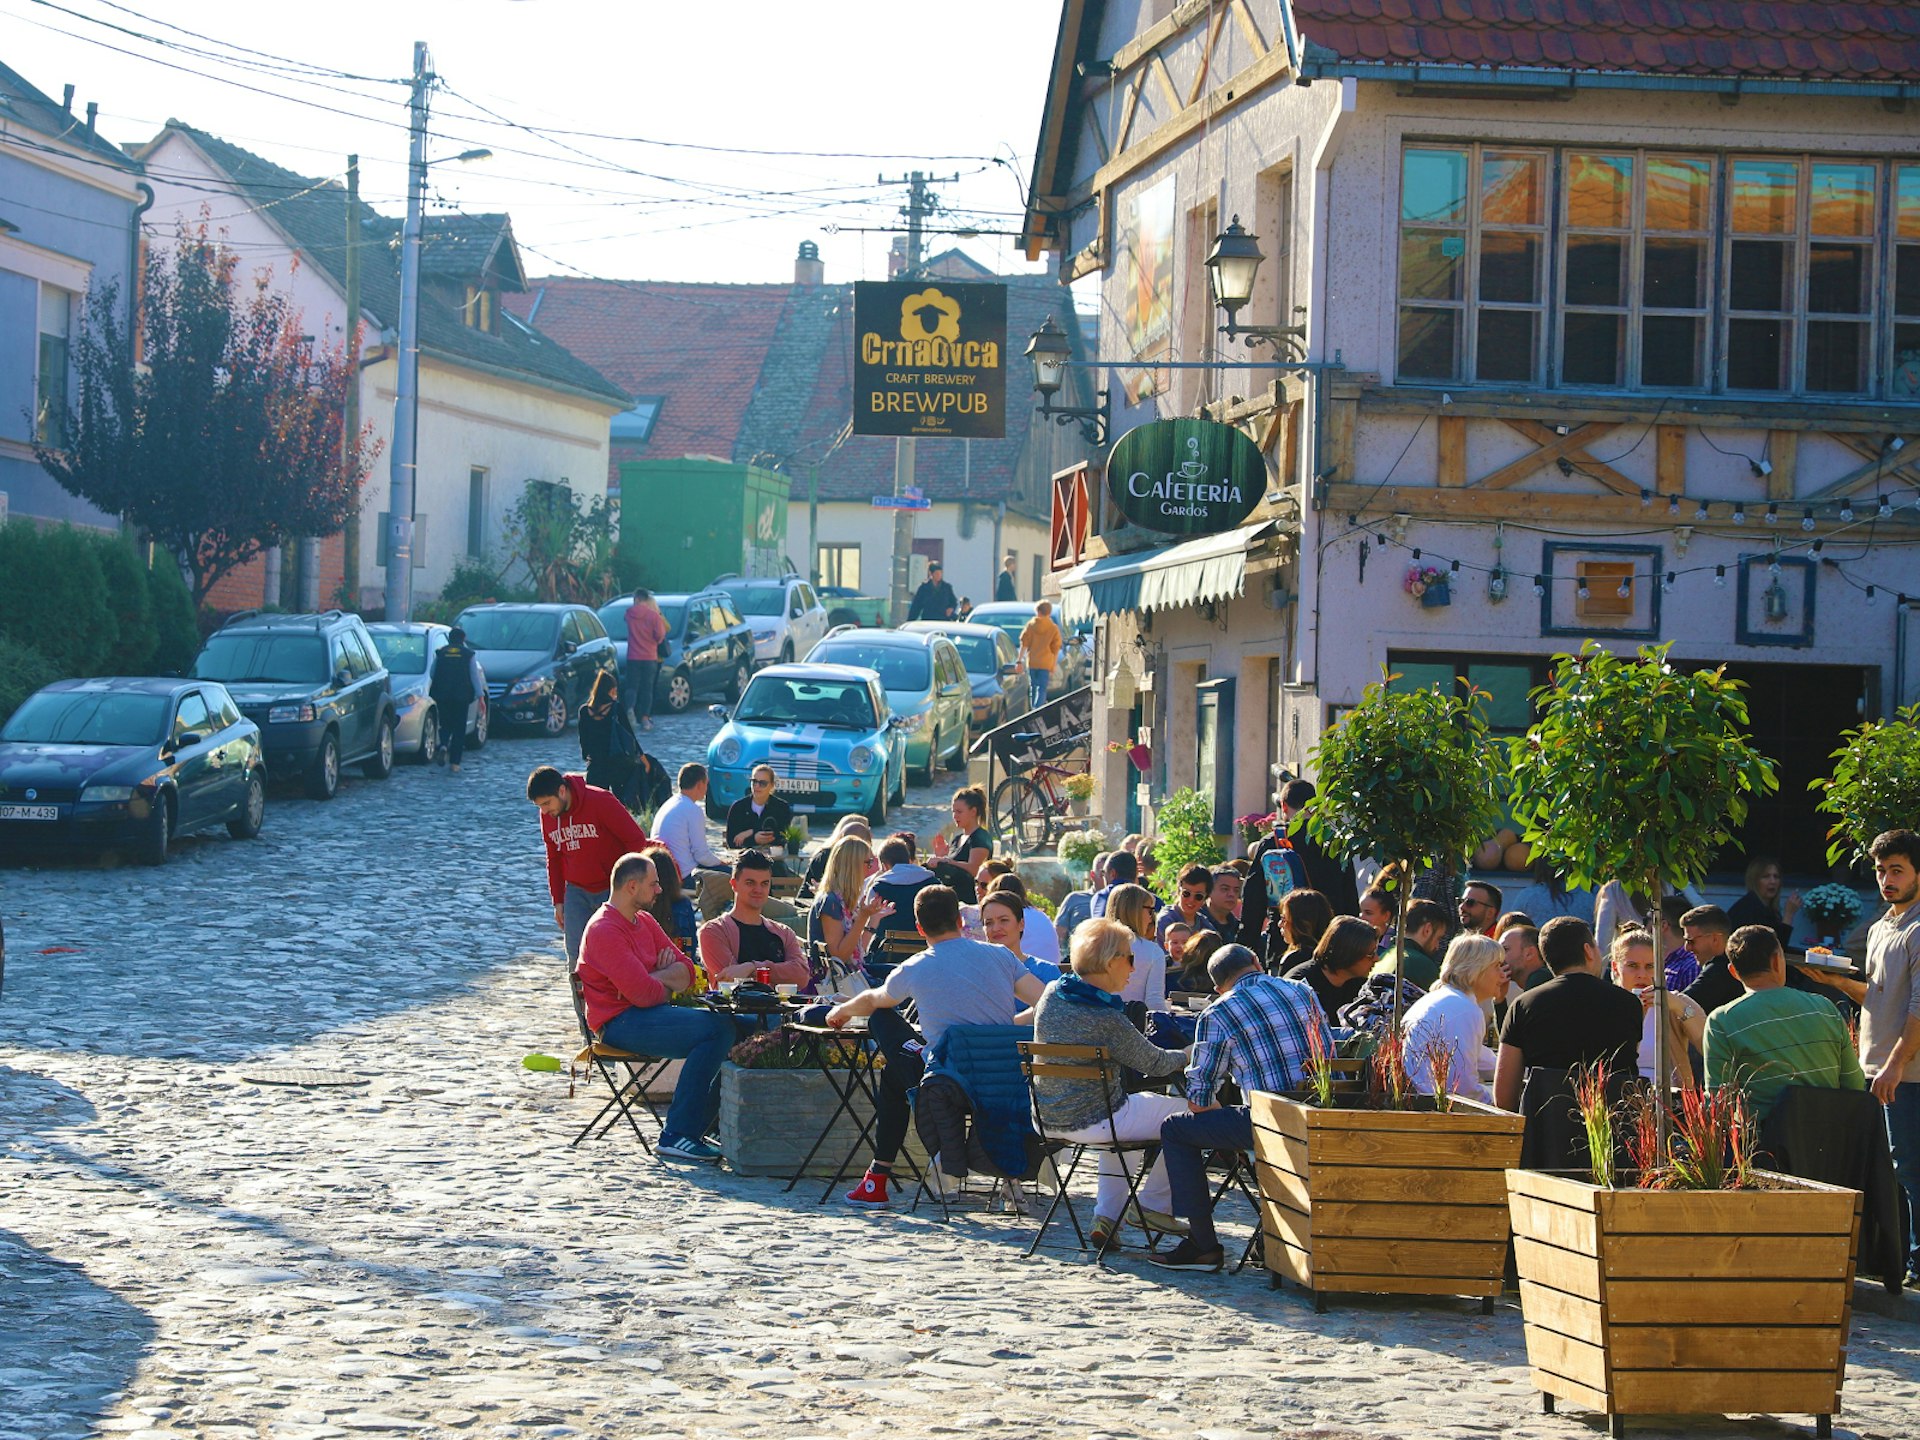 People sitting outside in front of a pub on a cobblestoned street in Zemun